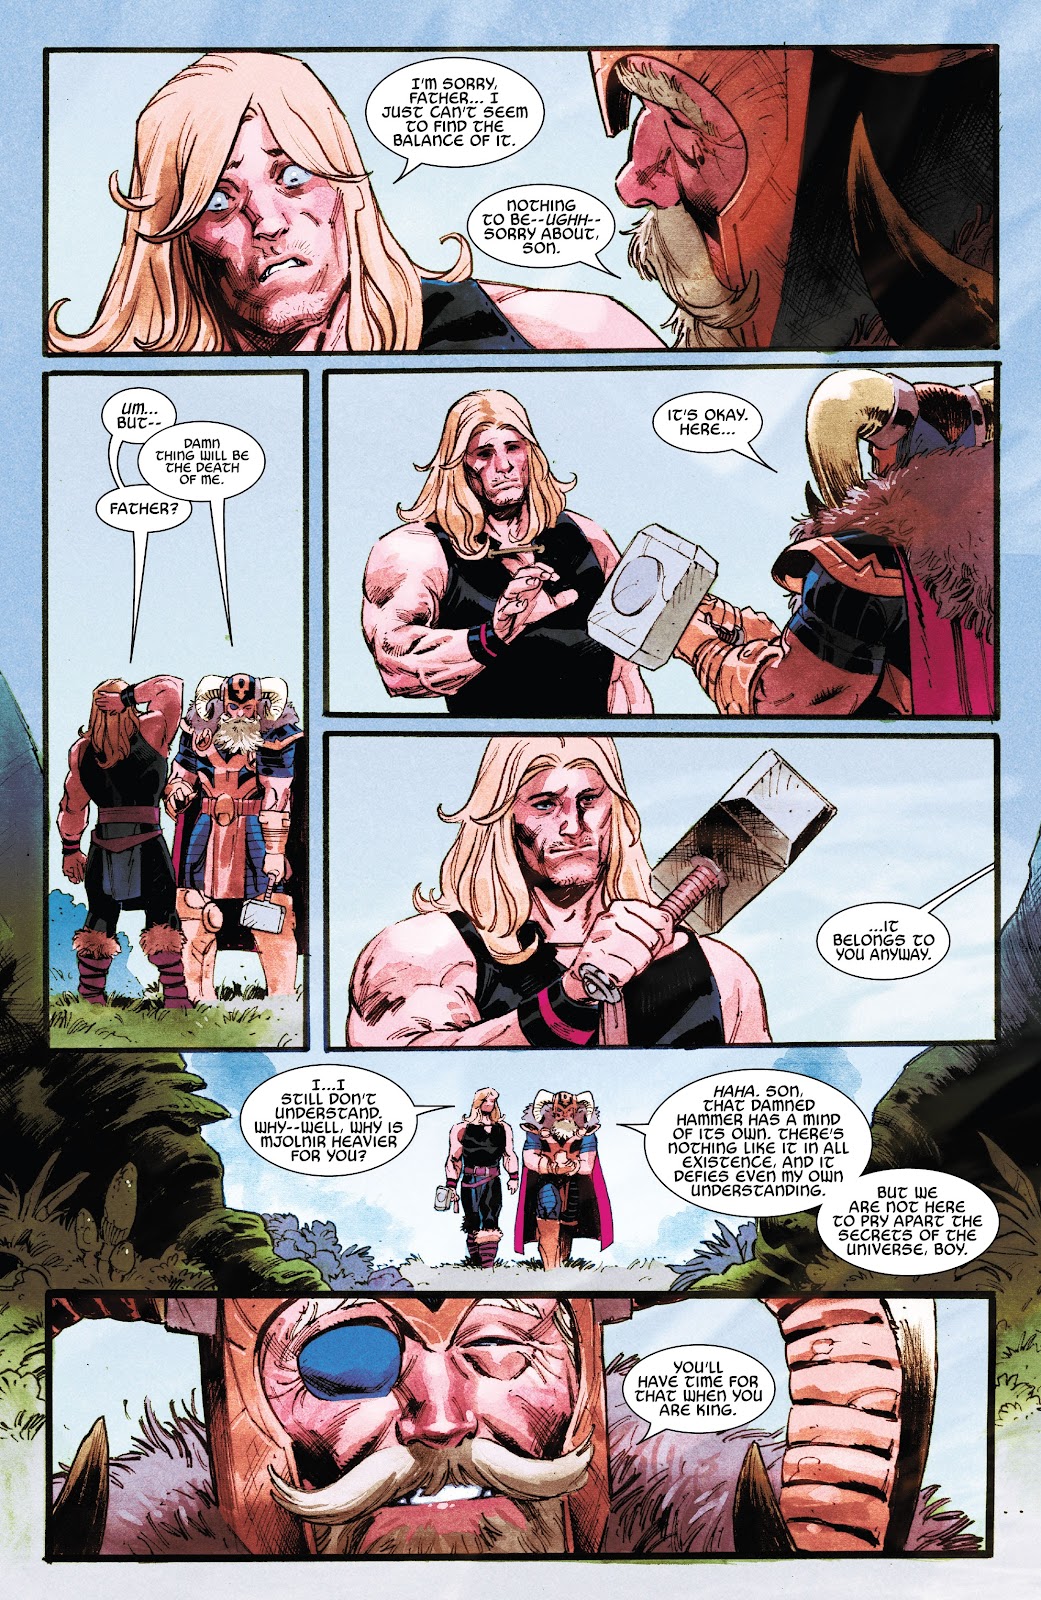 Young Thor Trains With Mjolnir